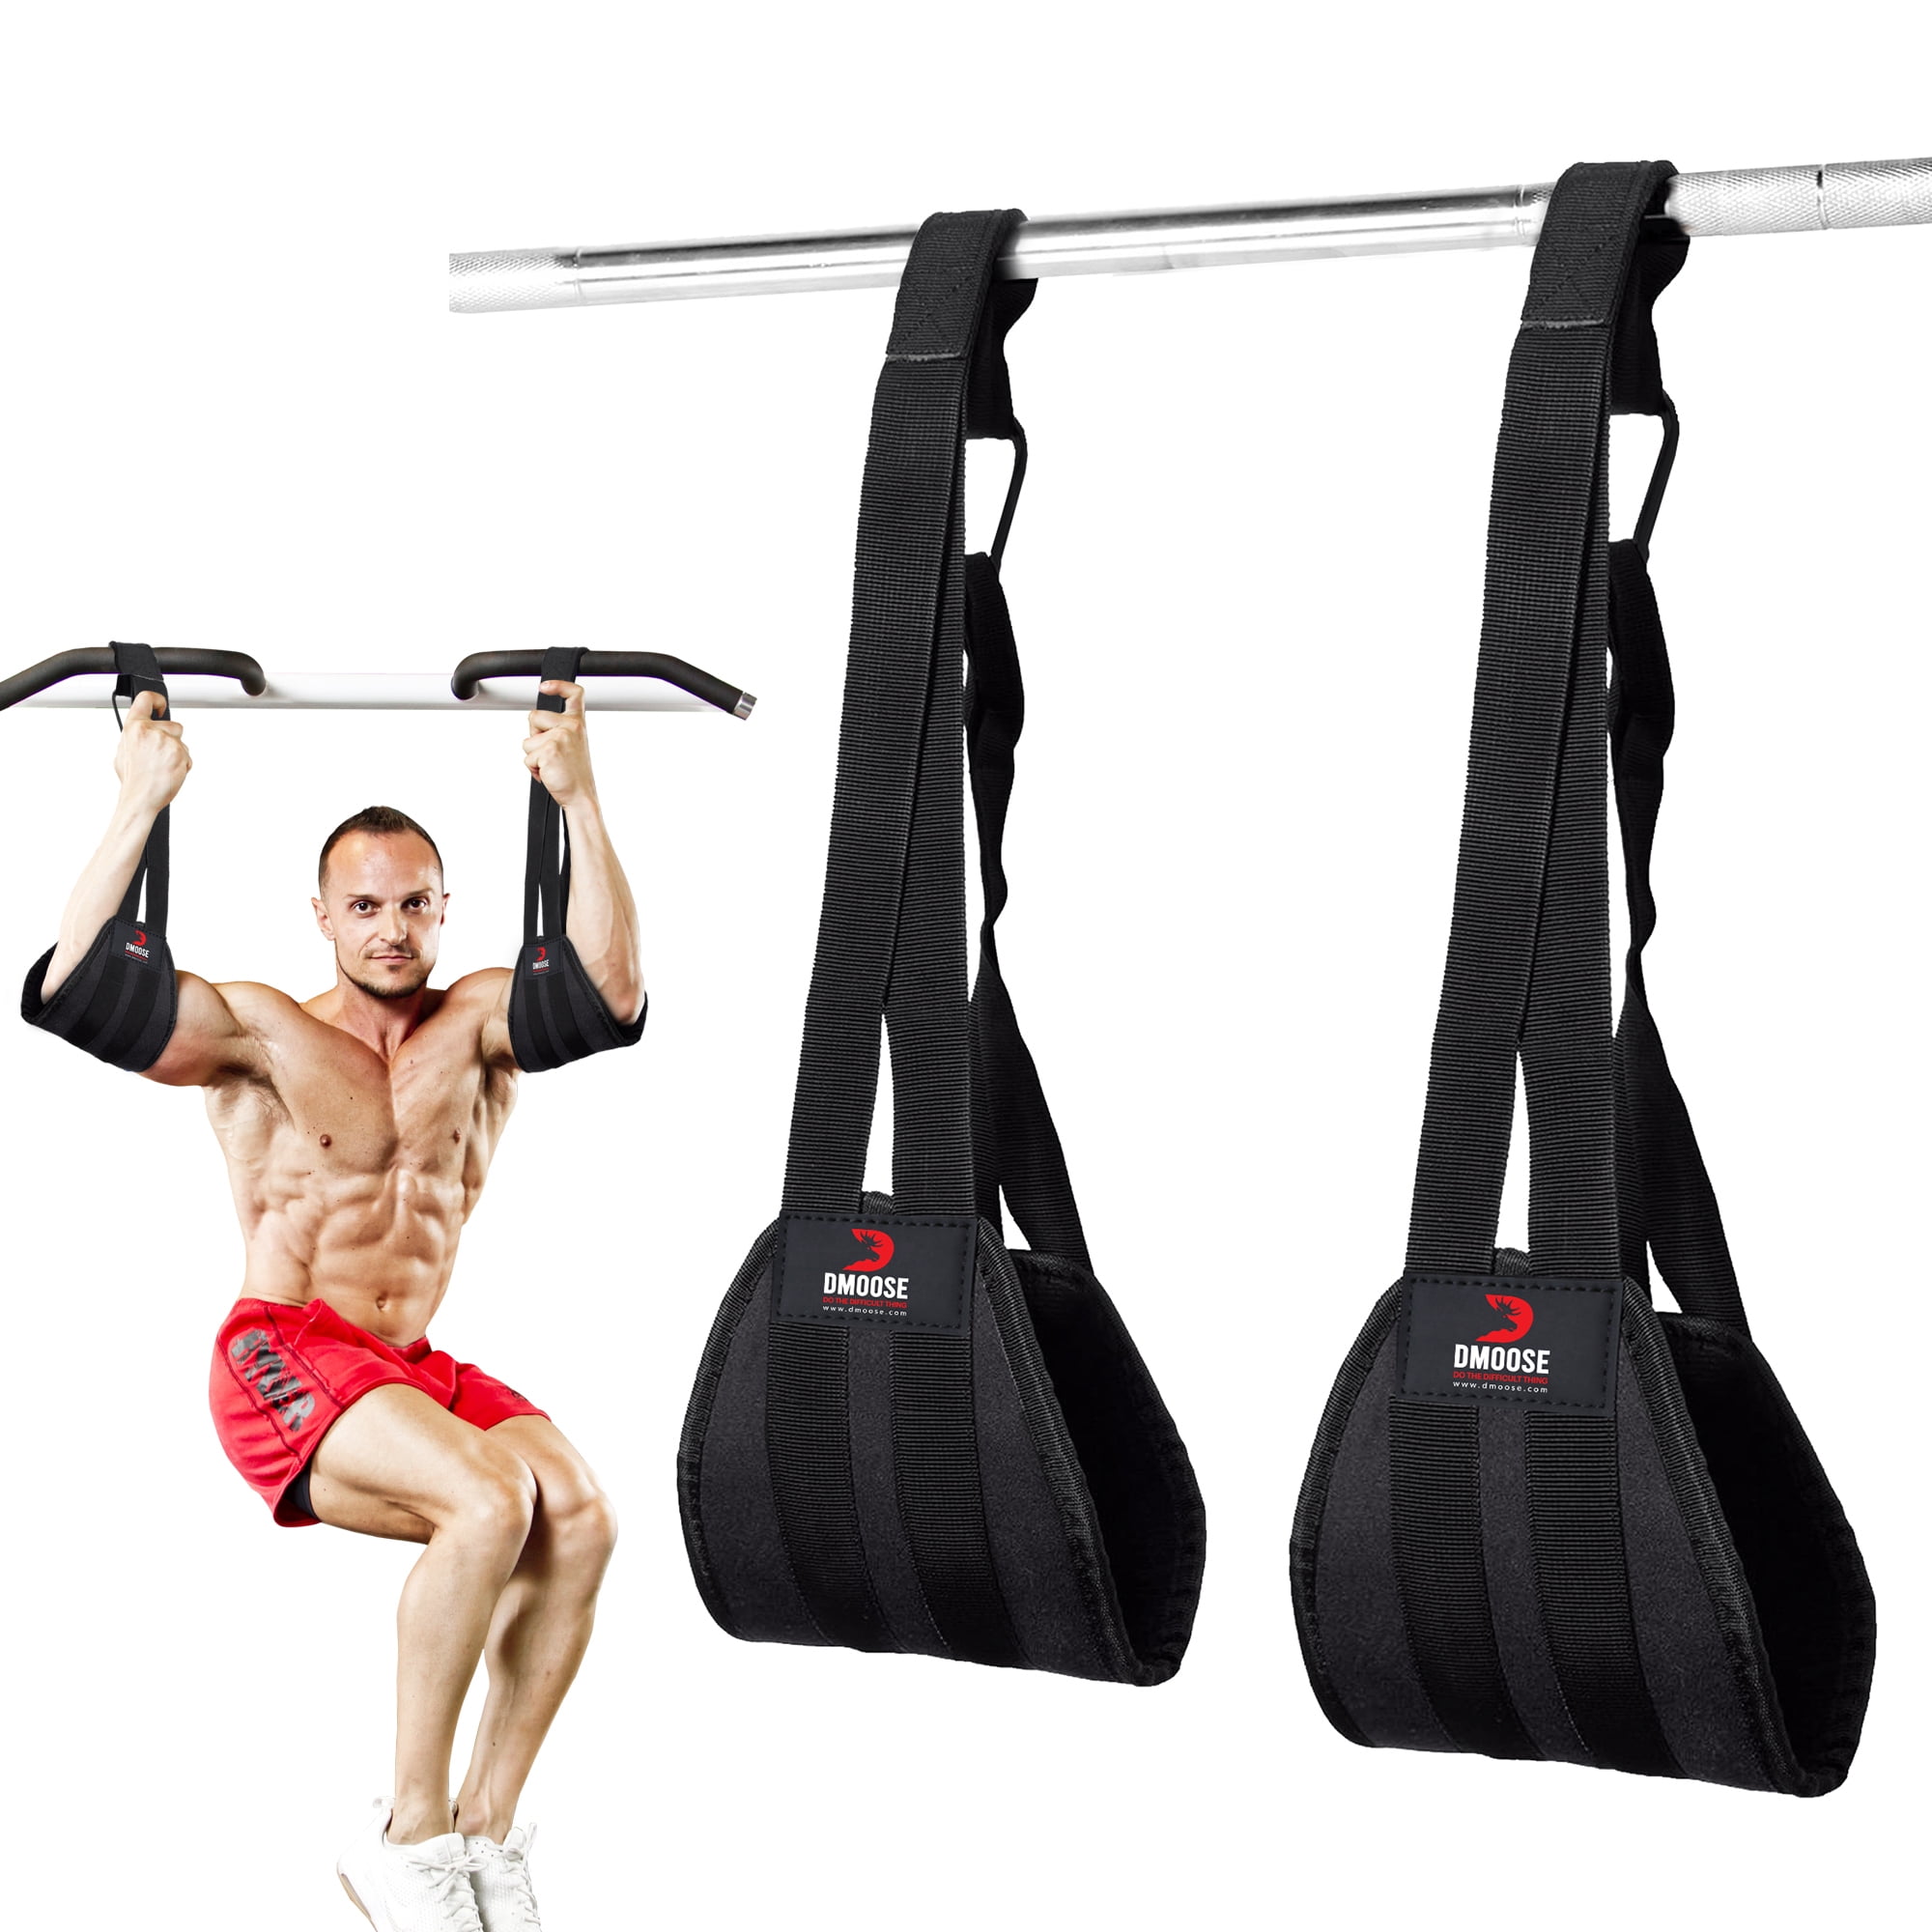 DMoose Fitness DMoose Ab Straps  Core strength training, Abdominal  muscles, Abs workout